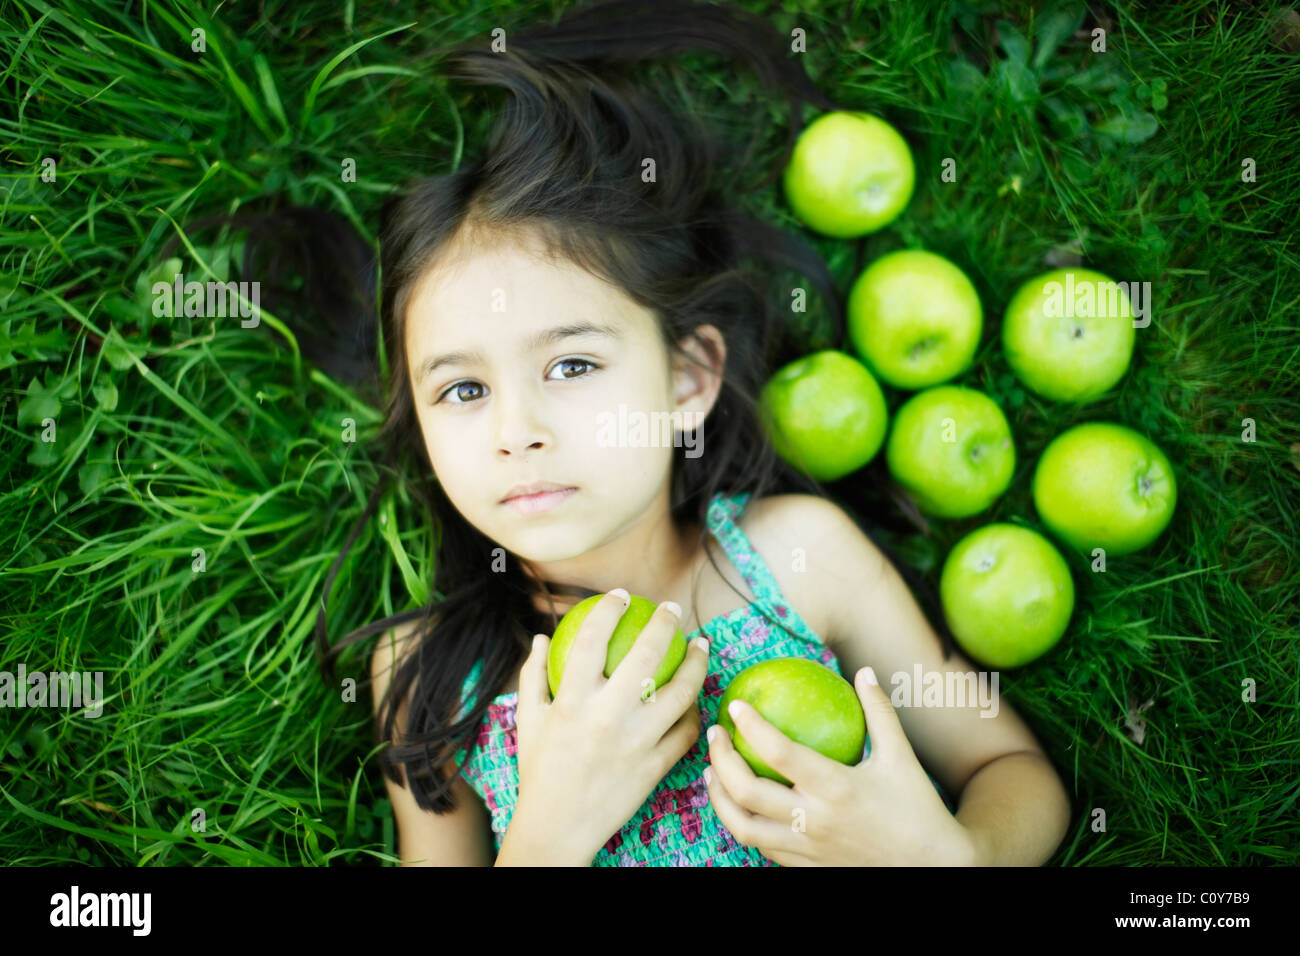 Six year old girl lies on grass with green apples Stock Photo